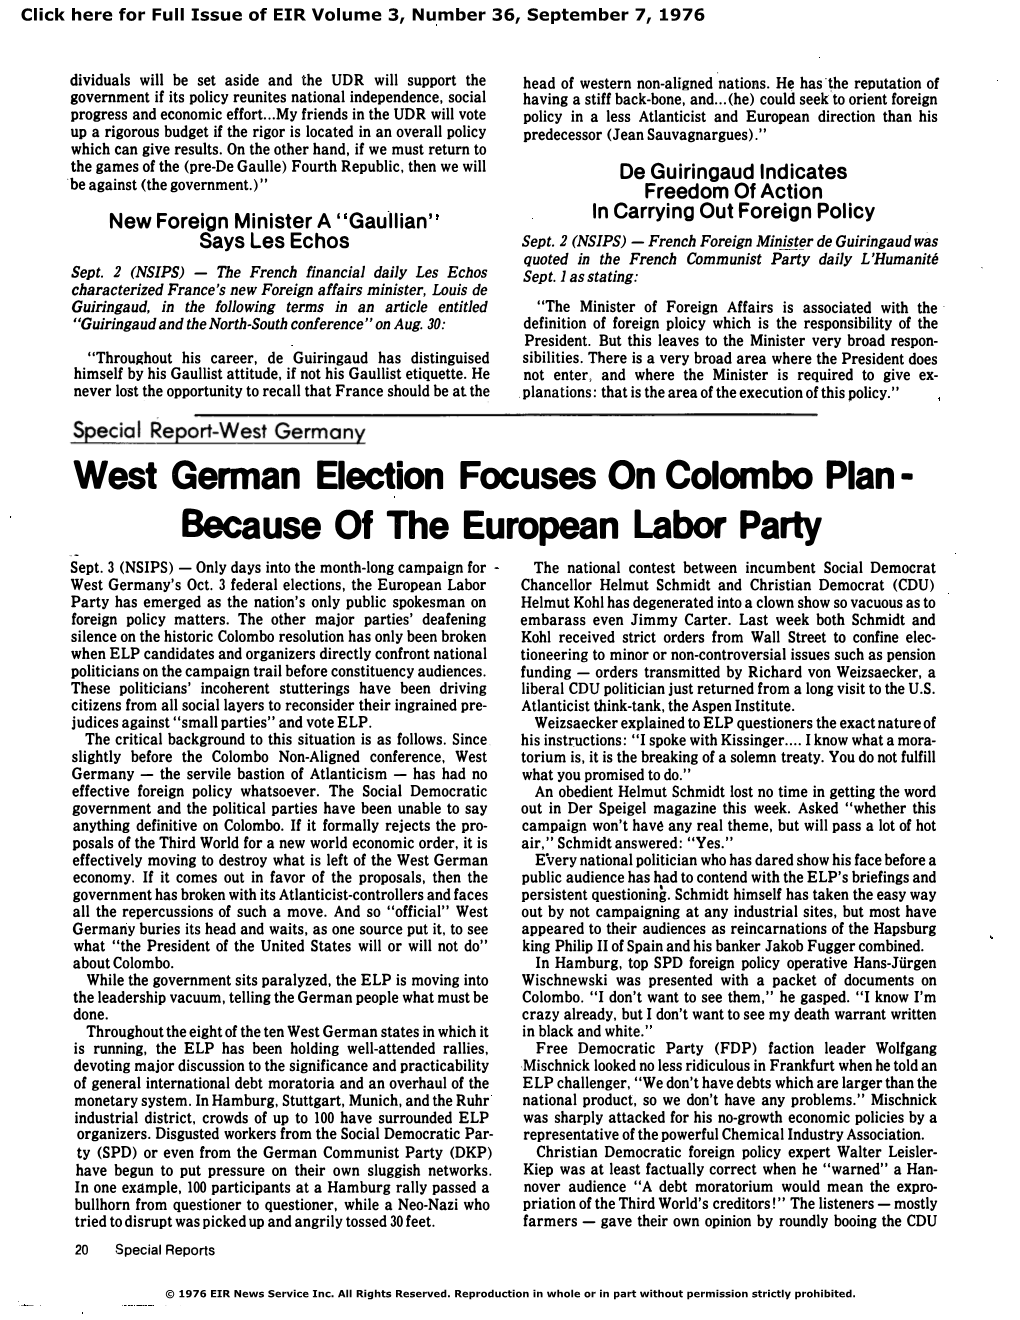 West German Election Focuses on Colombo Plan—Because of The